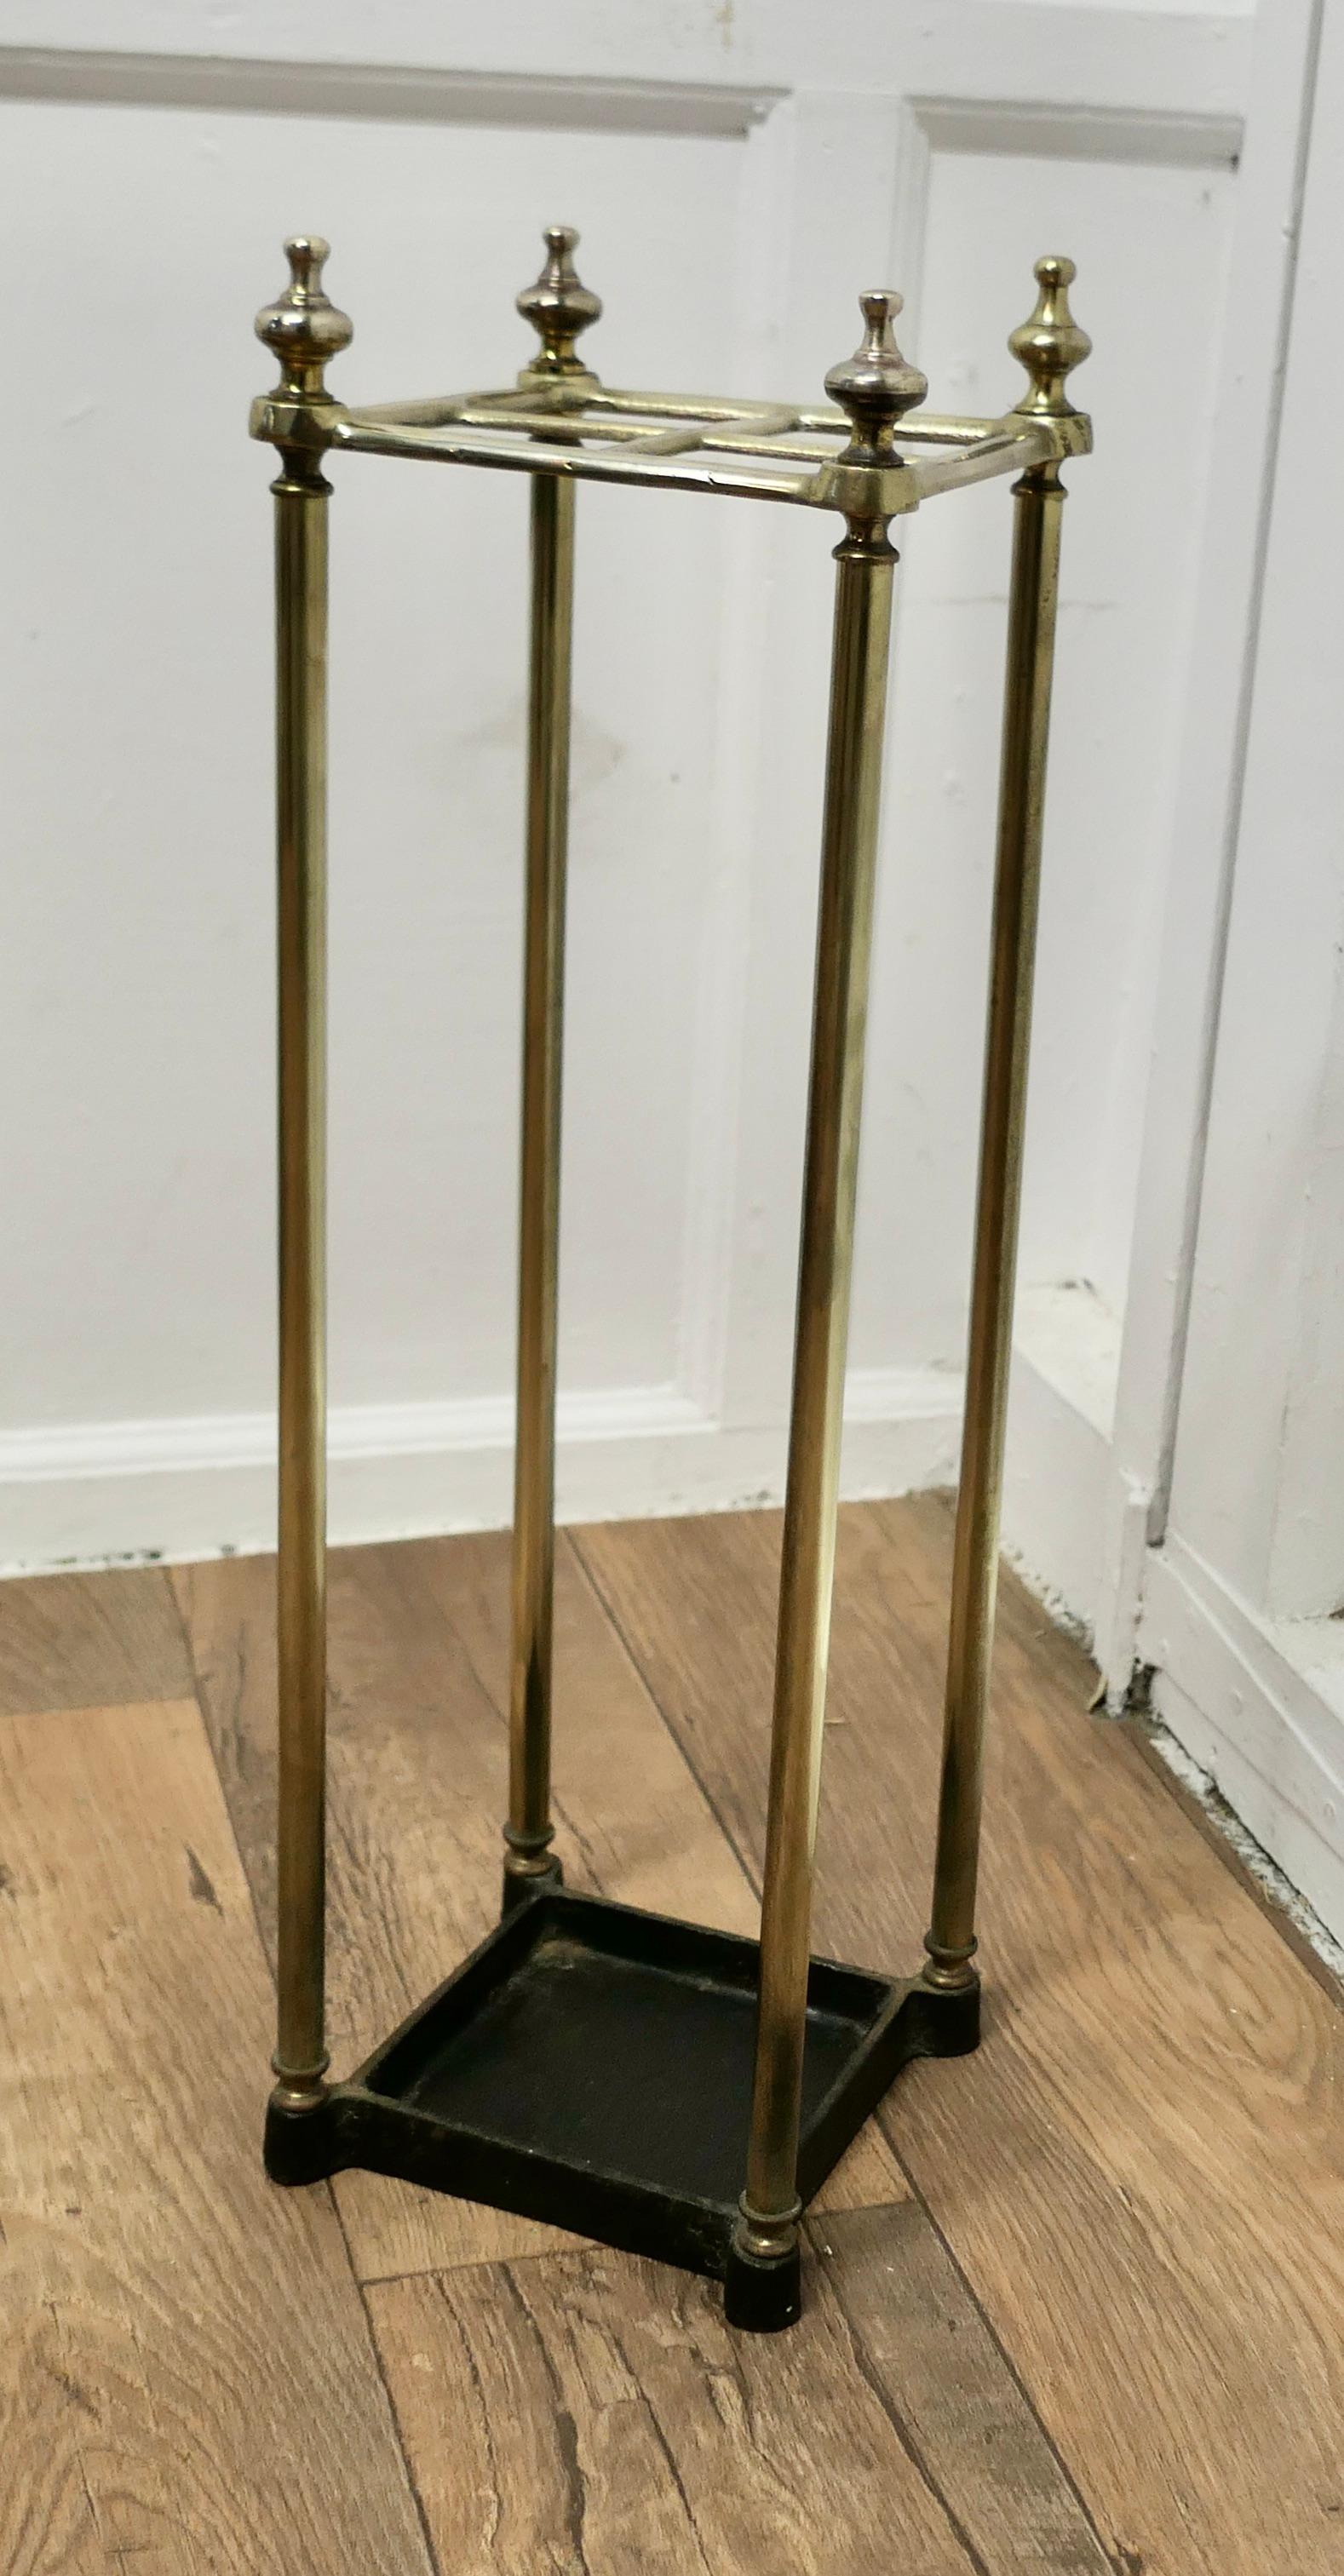 A Victorian Brass and Cast Iron Walking Stick Stand or Umbrella Stand

A charming piece, the stand has a brass top divided into 4 sections to hold either Walking Sticks or Umbrellas, the heavy iron base is also the drip tray 
The stand is 26” high,